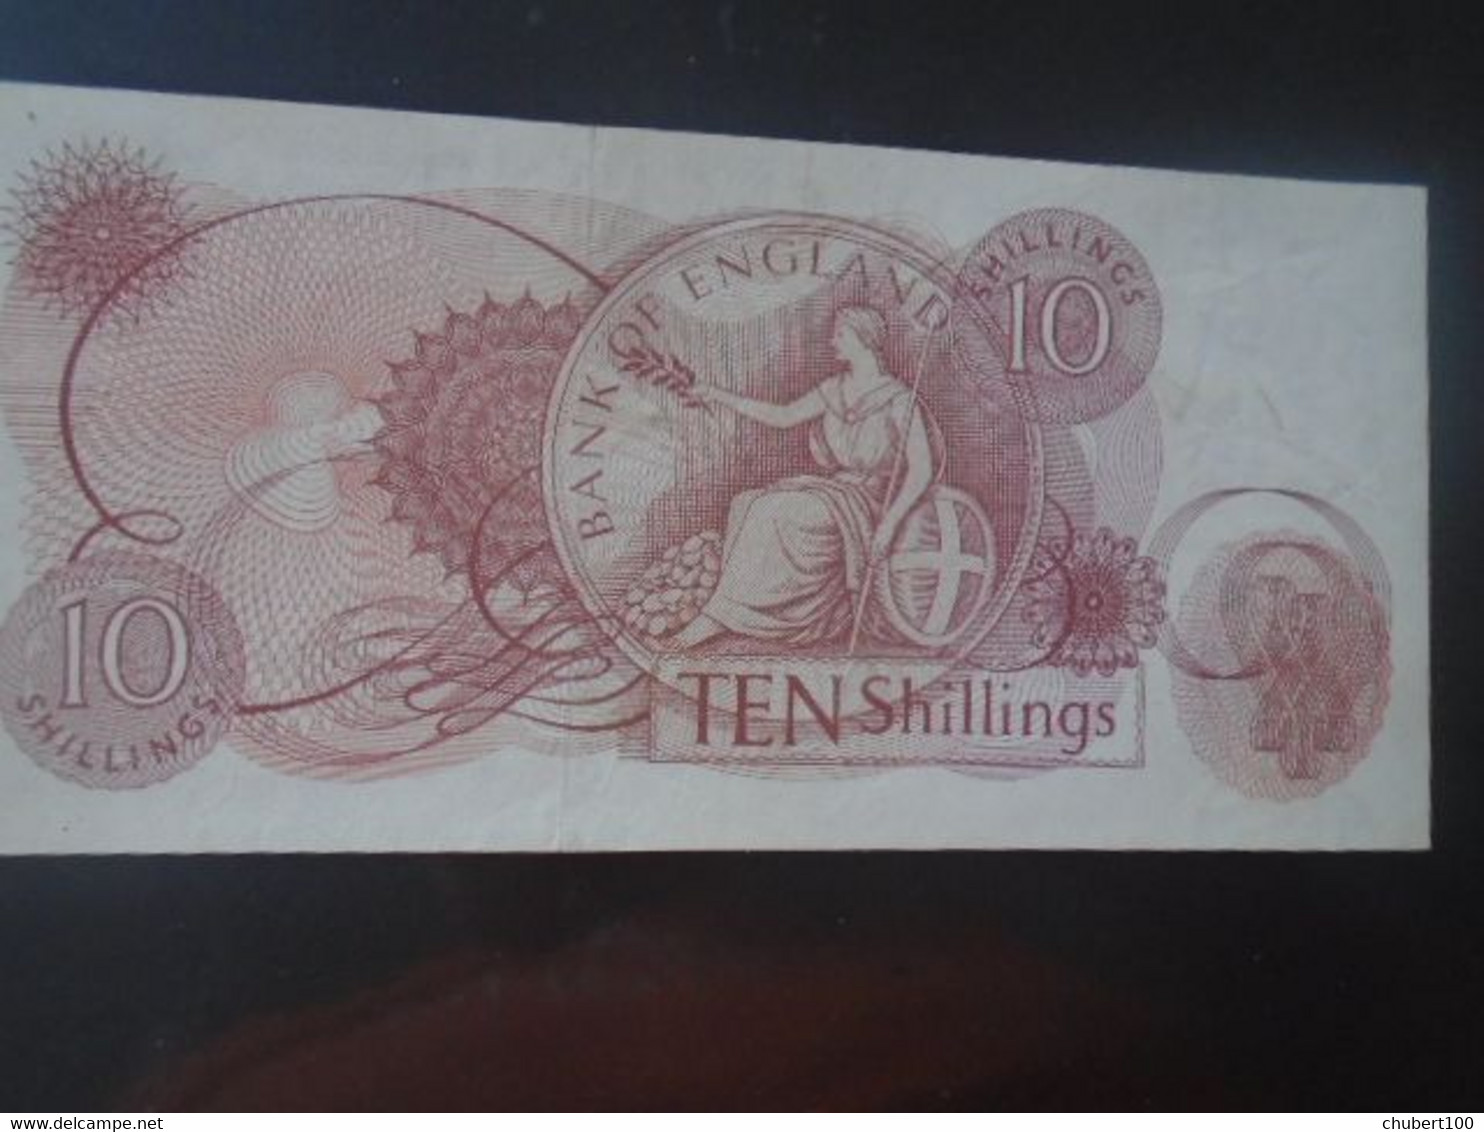 GREAT BRITAIN , P 373b , 10 Shillings , ND 1962, Almost  UNC , Presque  Neuf - 10 Schillings